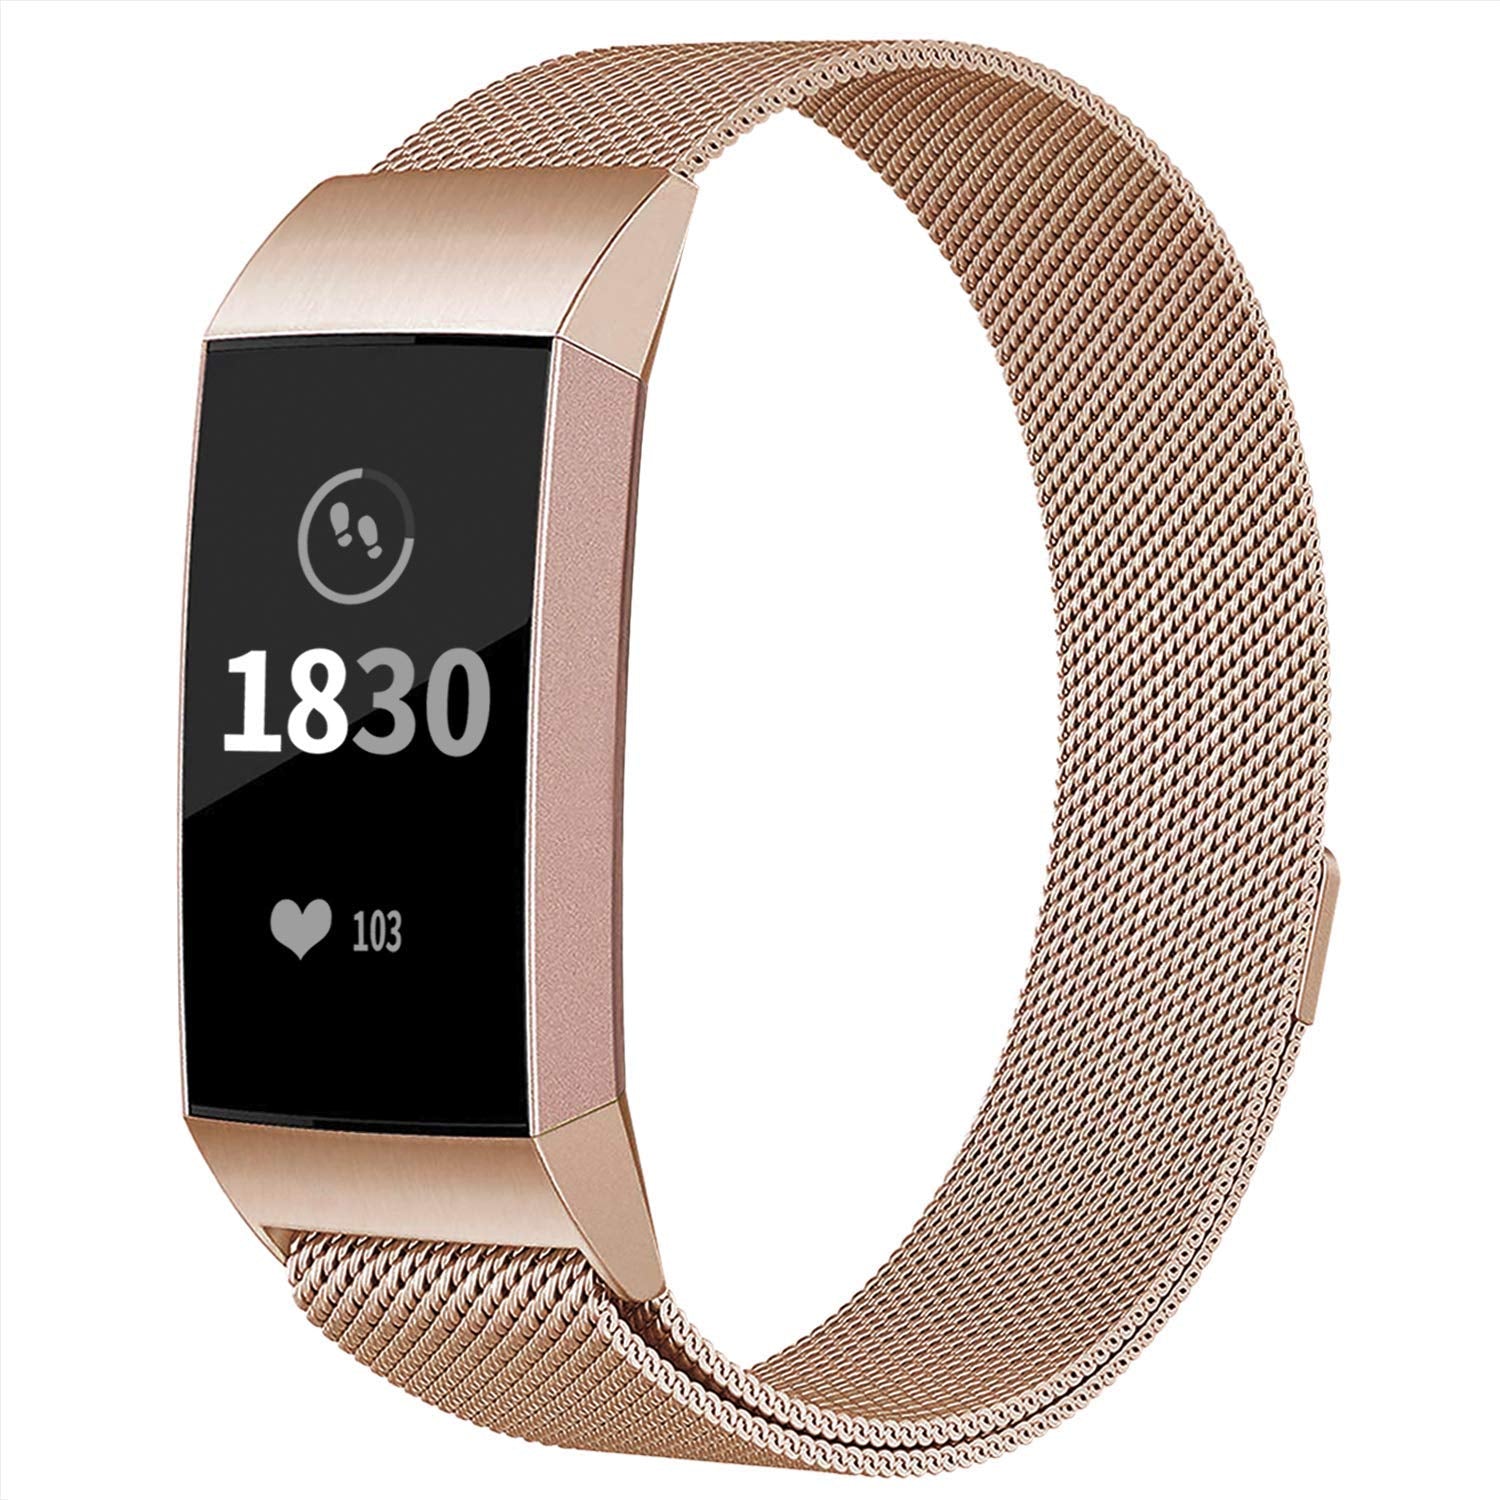 fitbit charge 3 strap